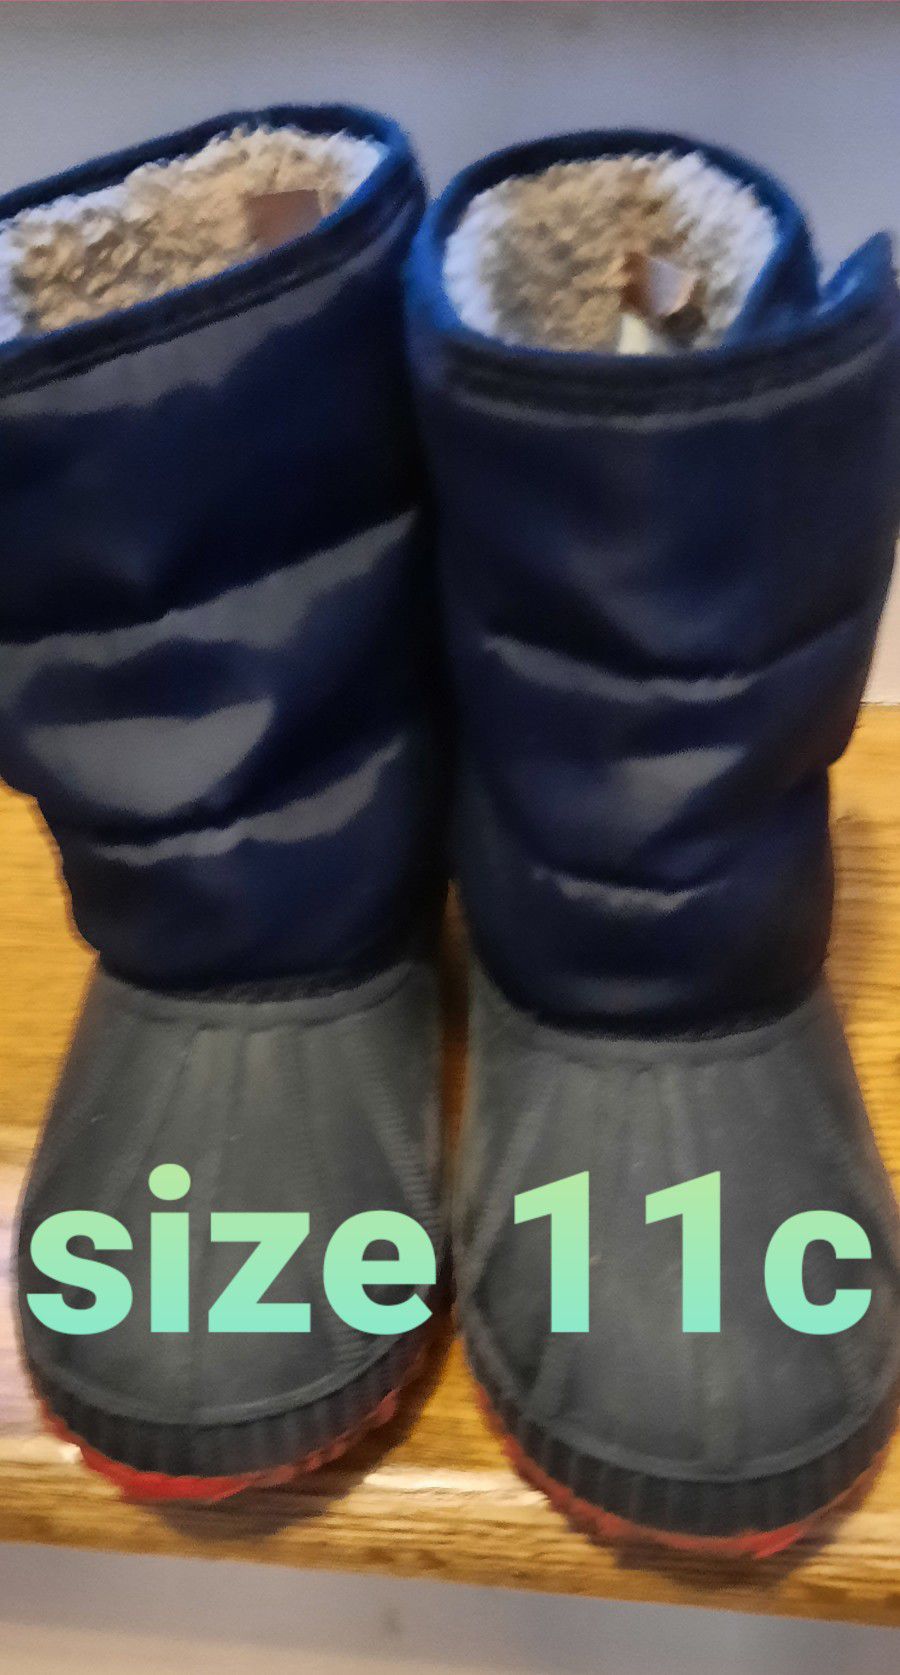 Toddler Snow Boots - Size 11c